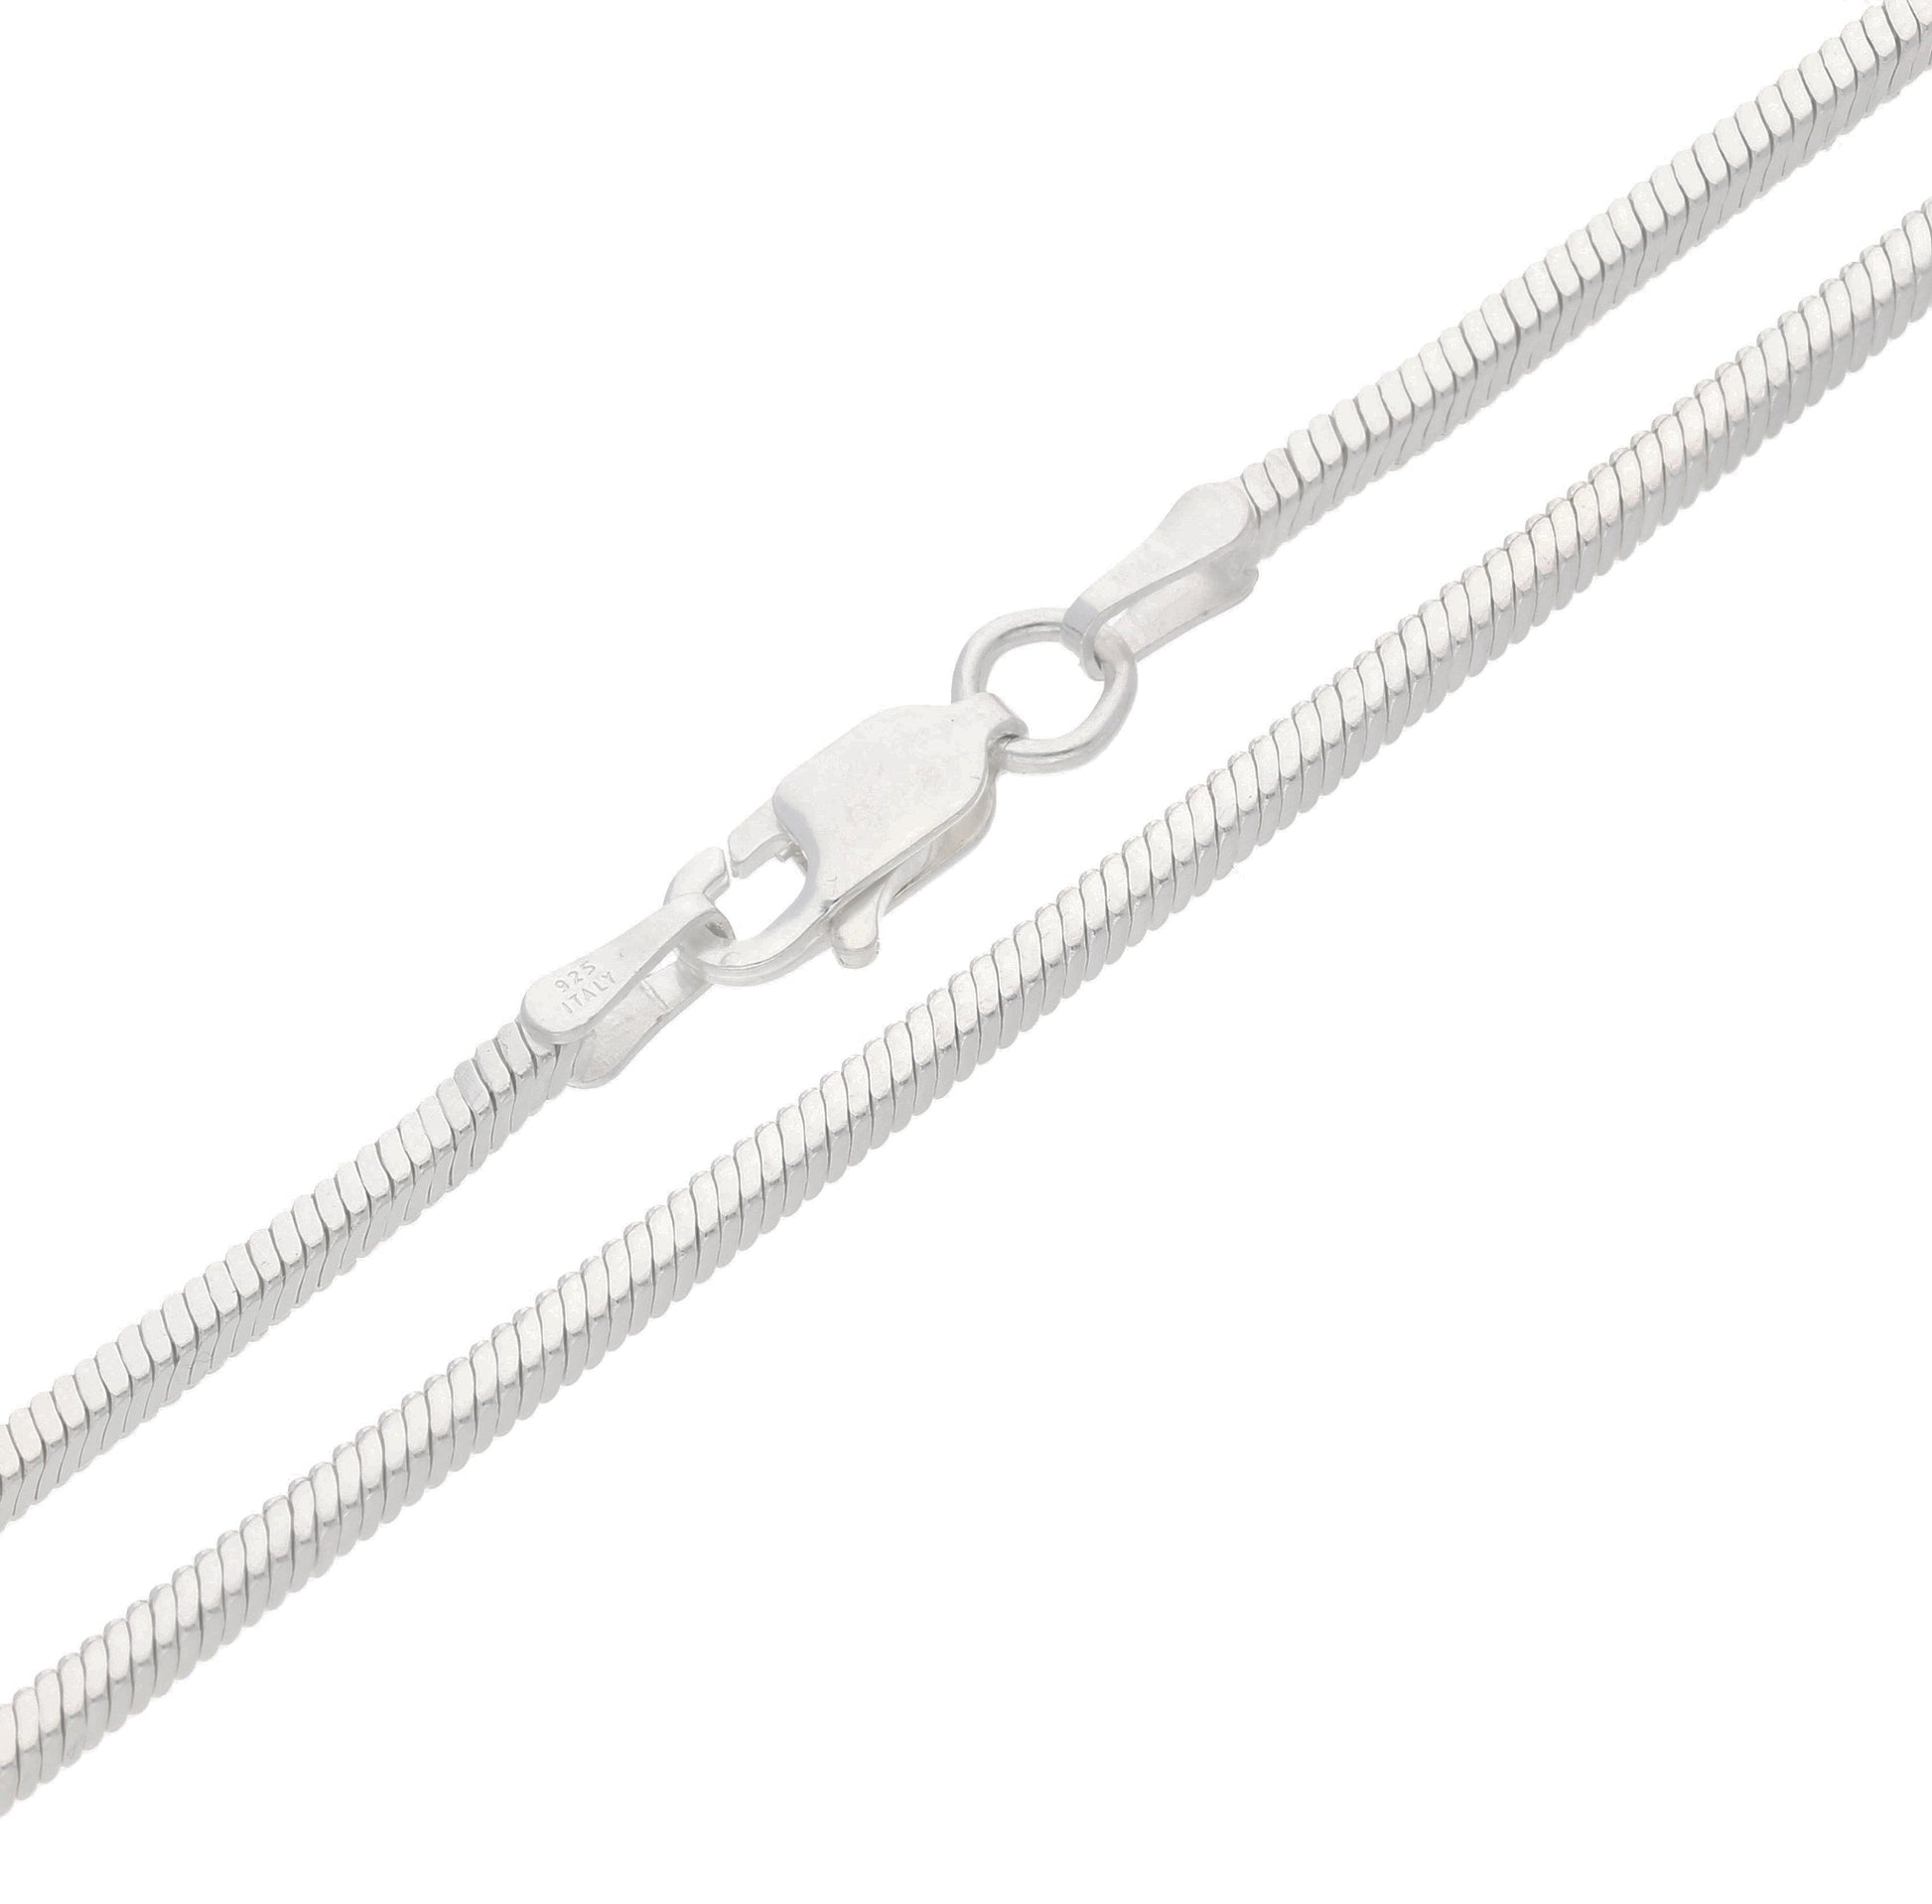 2mm Sterling Silver Diamond-Cut Square Magic Snake Chain Necklace - Silver Insanity